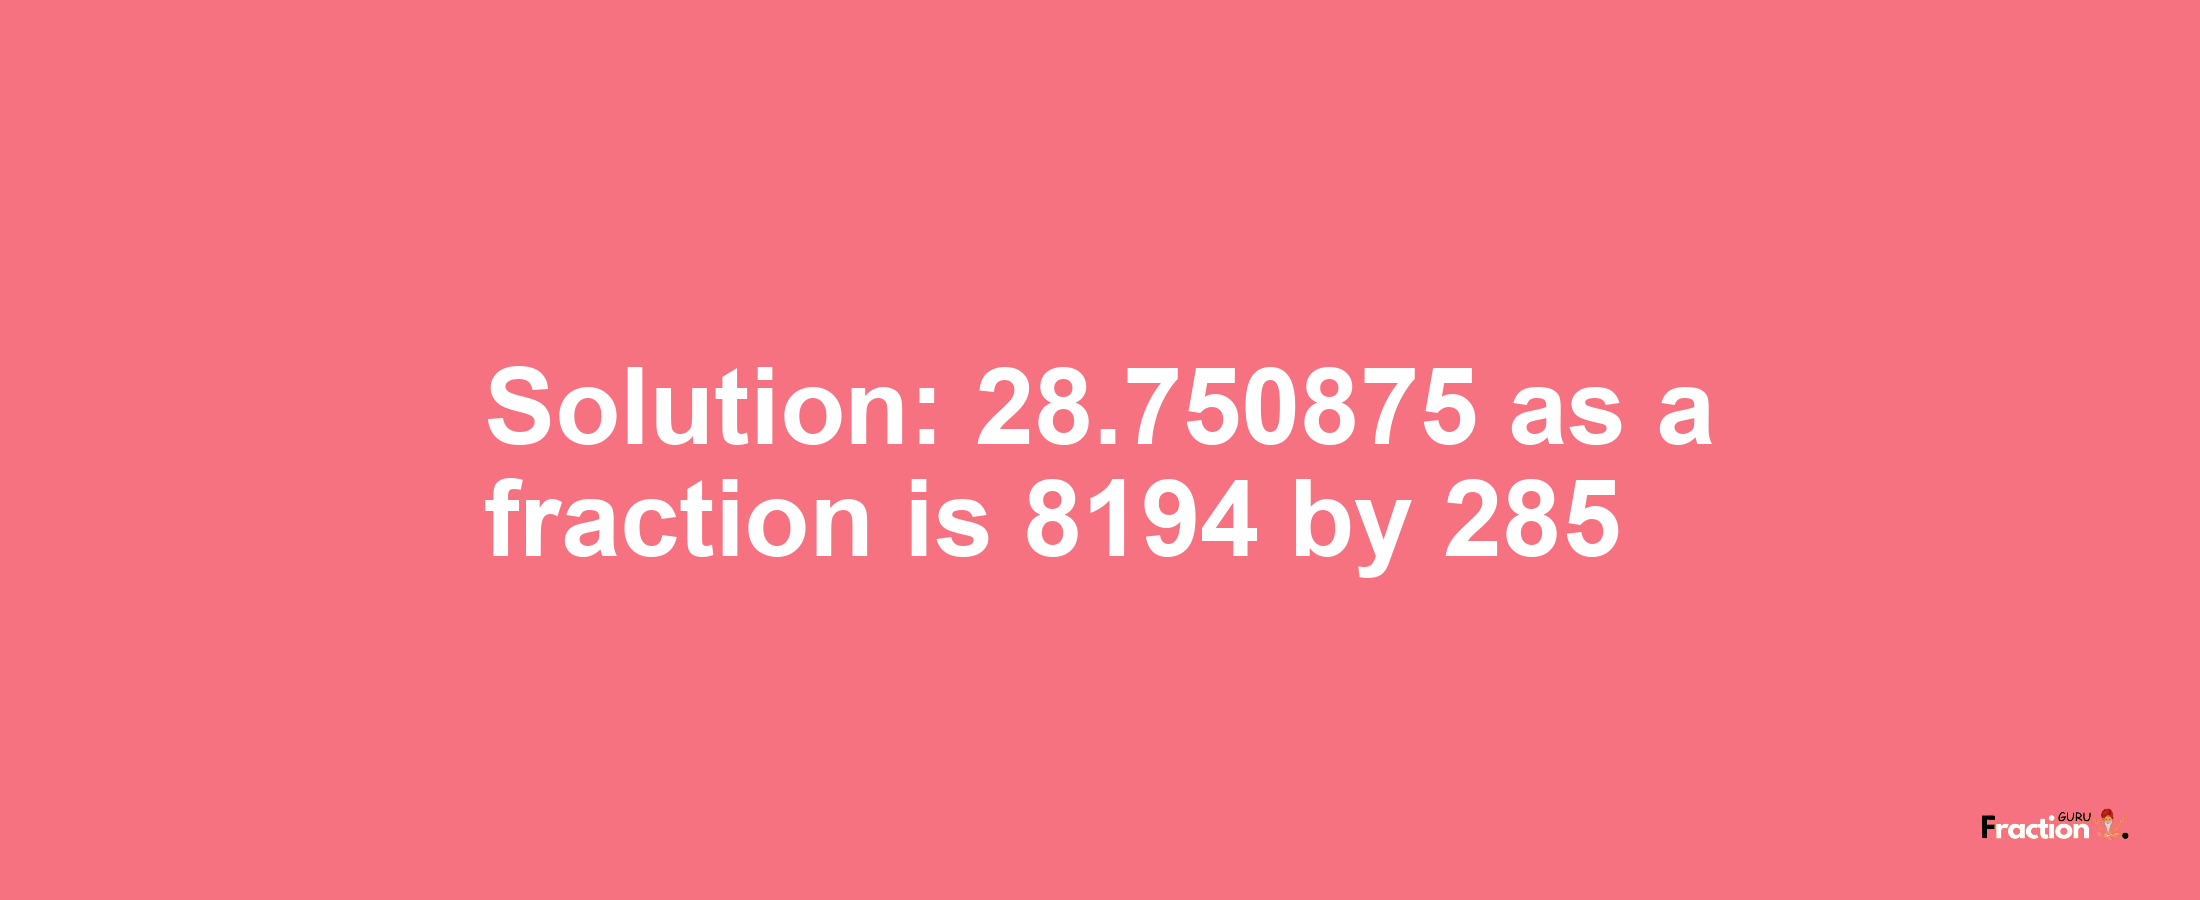 Solution:28.750875 as a fraction is 8194/285